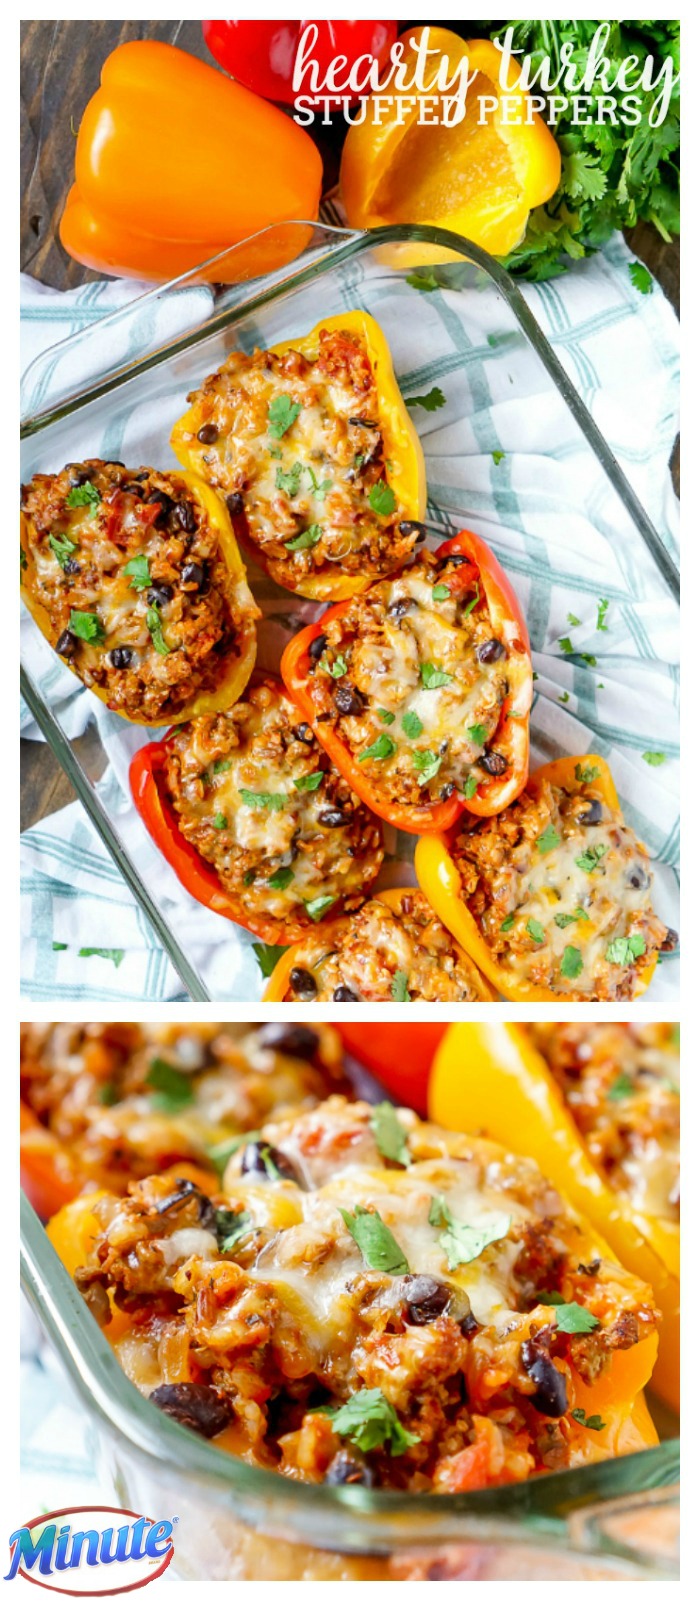 Hearty Turkey Stuffed Peppers - This dinner idea is one of my favorite comfort food meals! Plus, it makes delicious leftovers! | The Love Nerds AD MealsWithMinute @minutericeUS